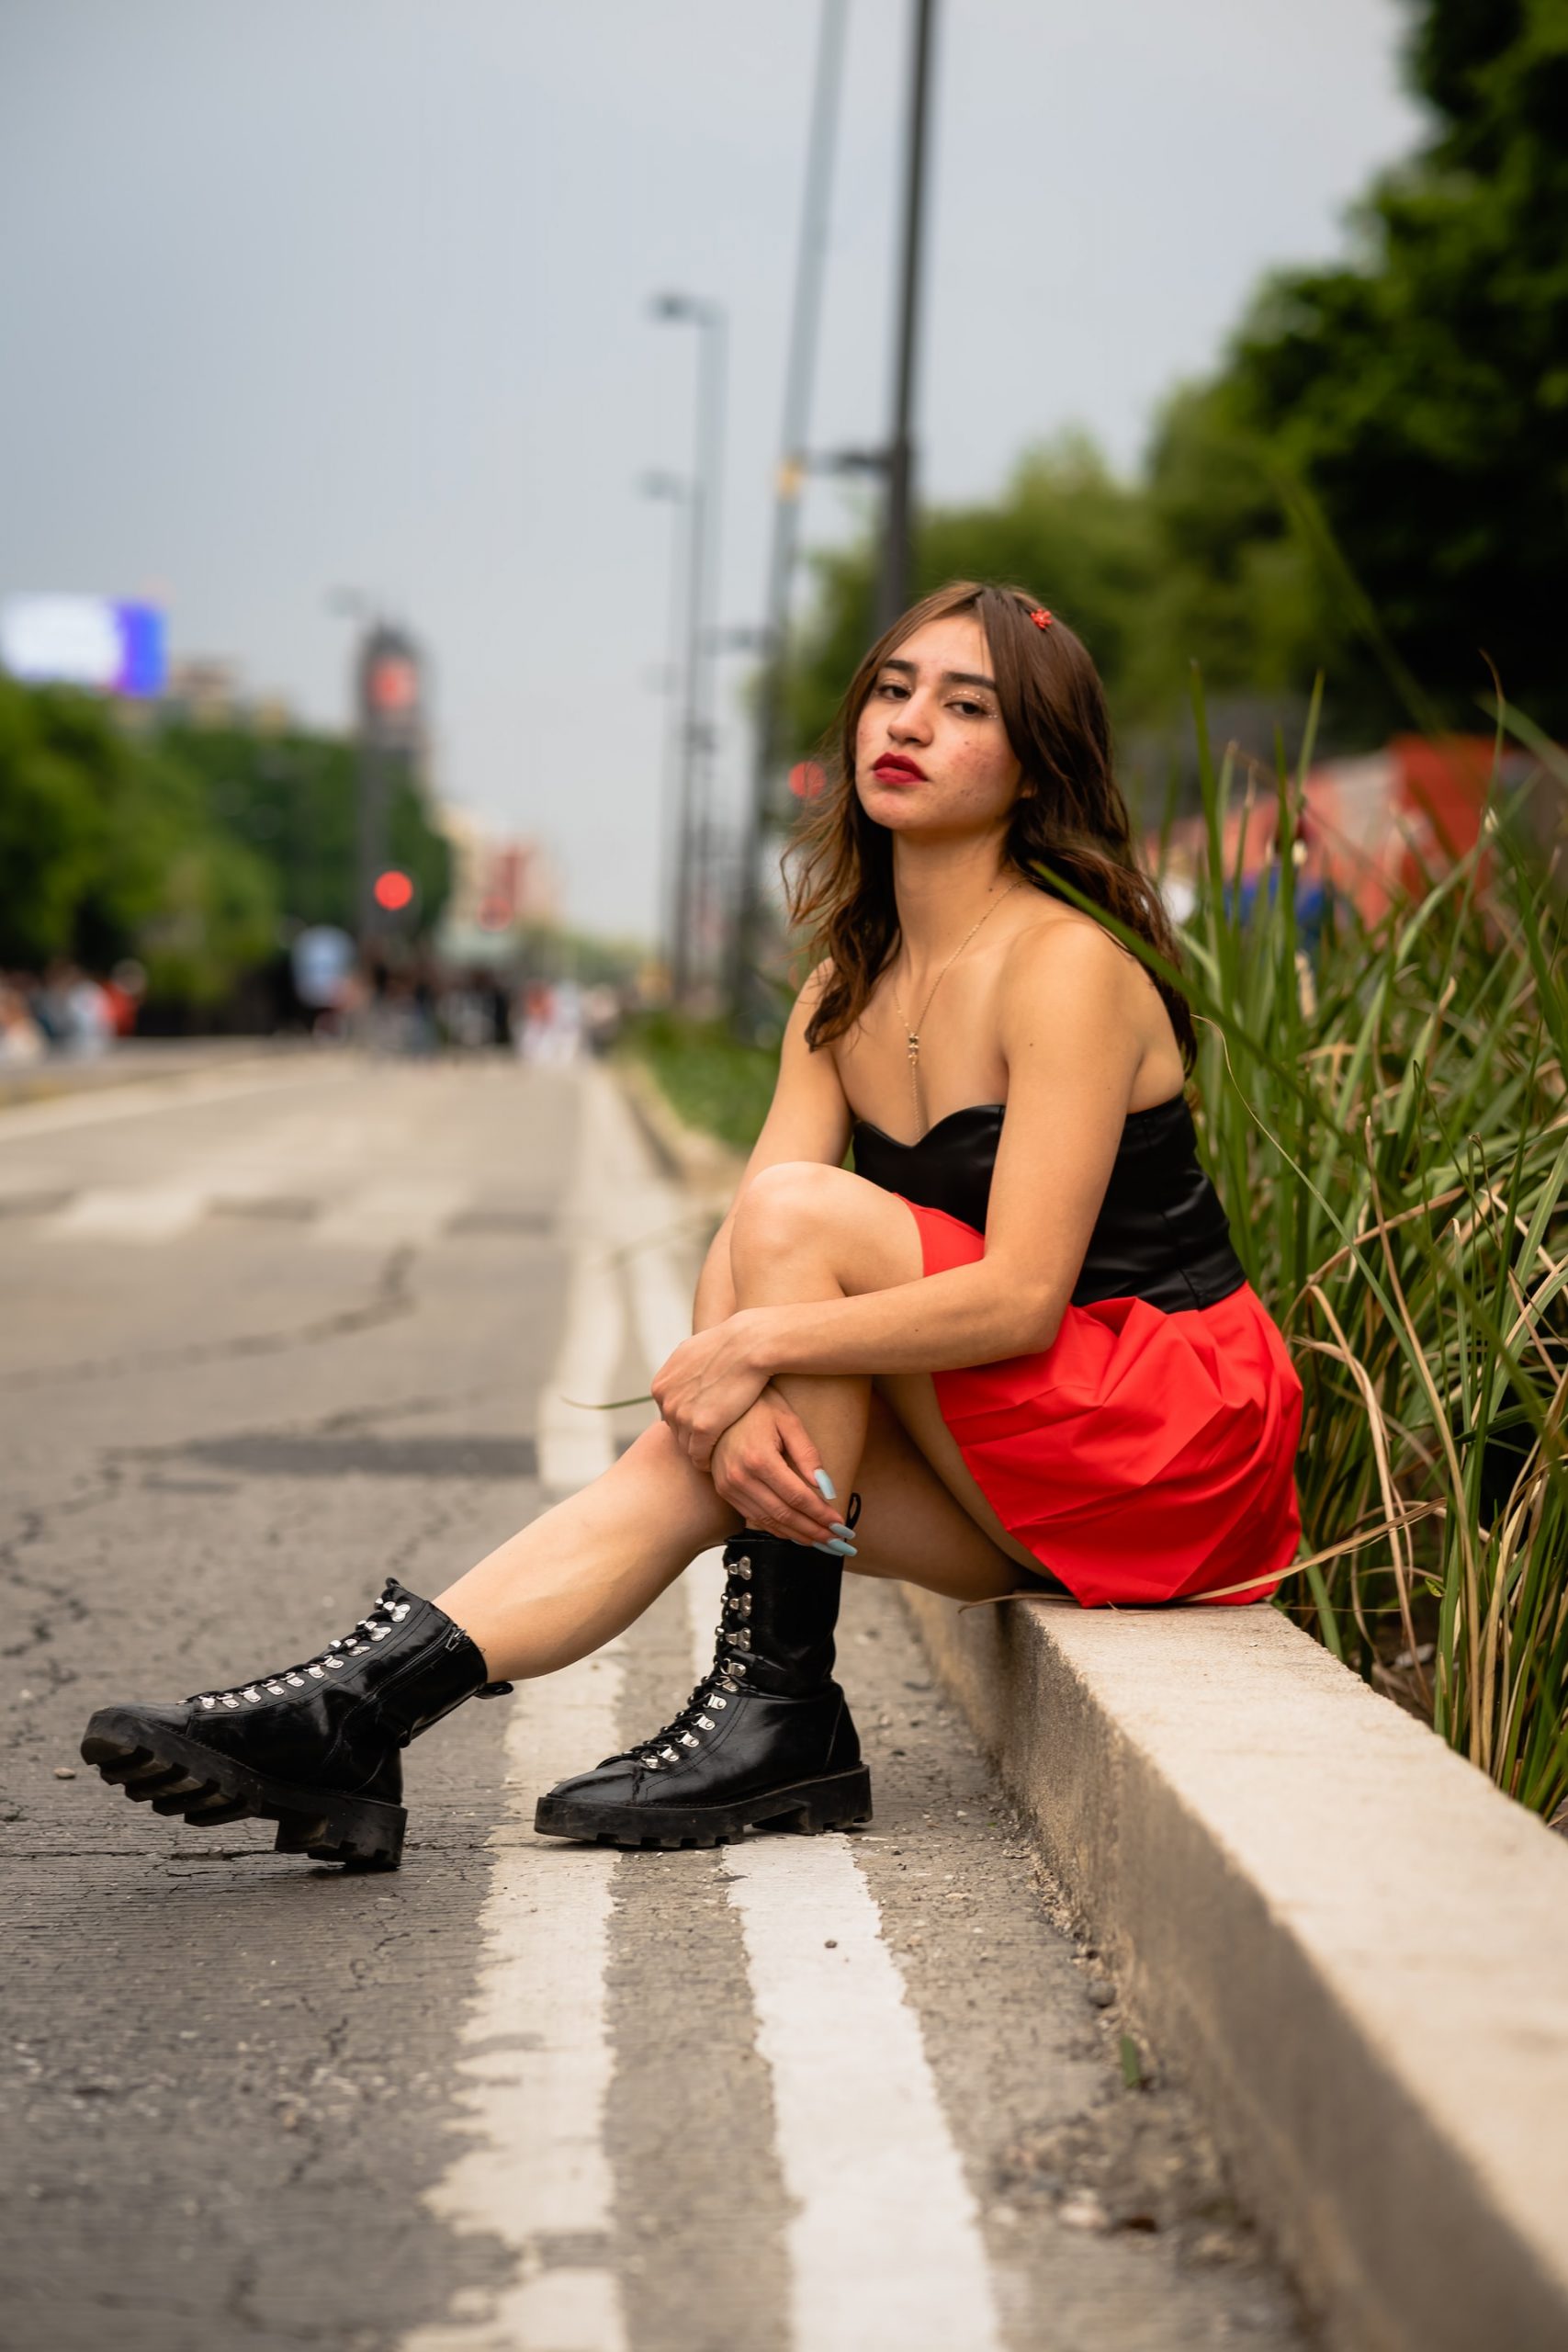 Mexican Model wearing the black top and red shorts sitting on the edge of road